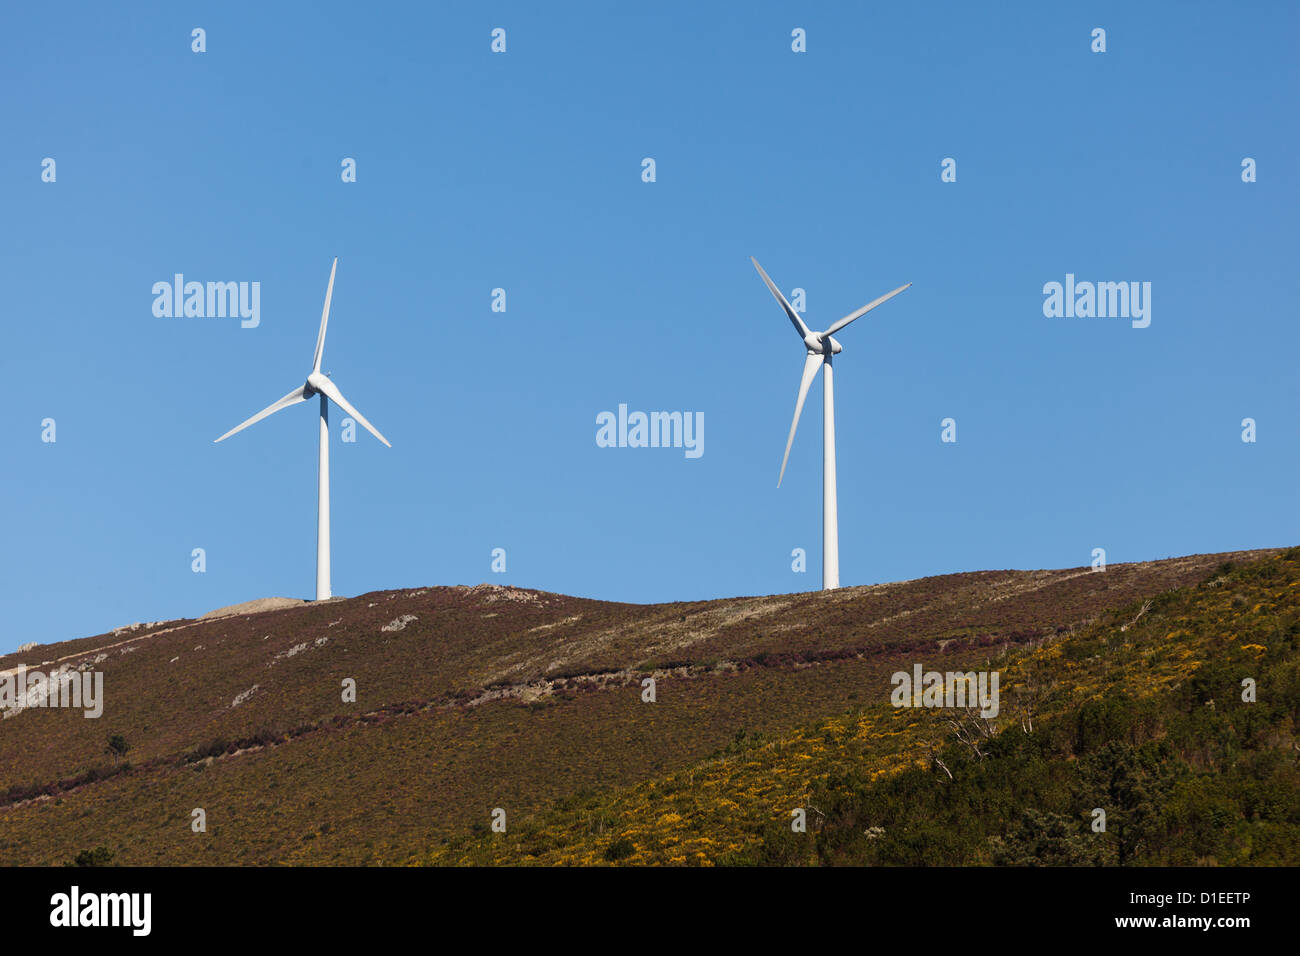 2 windmill turbines for generating electric power on hill sihouetted against a blue sky Stock Photo